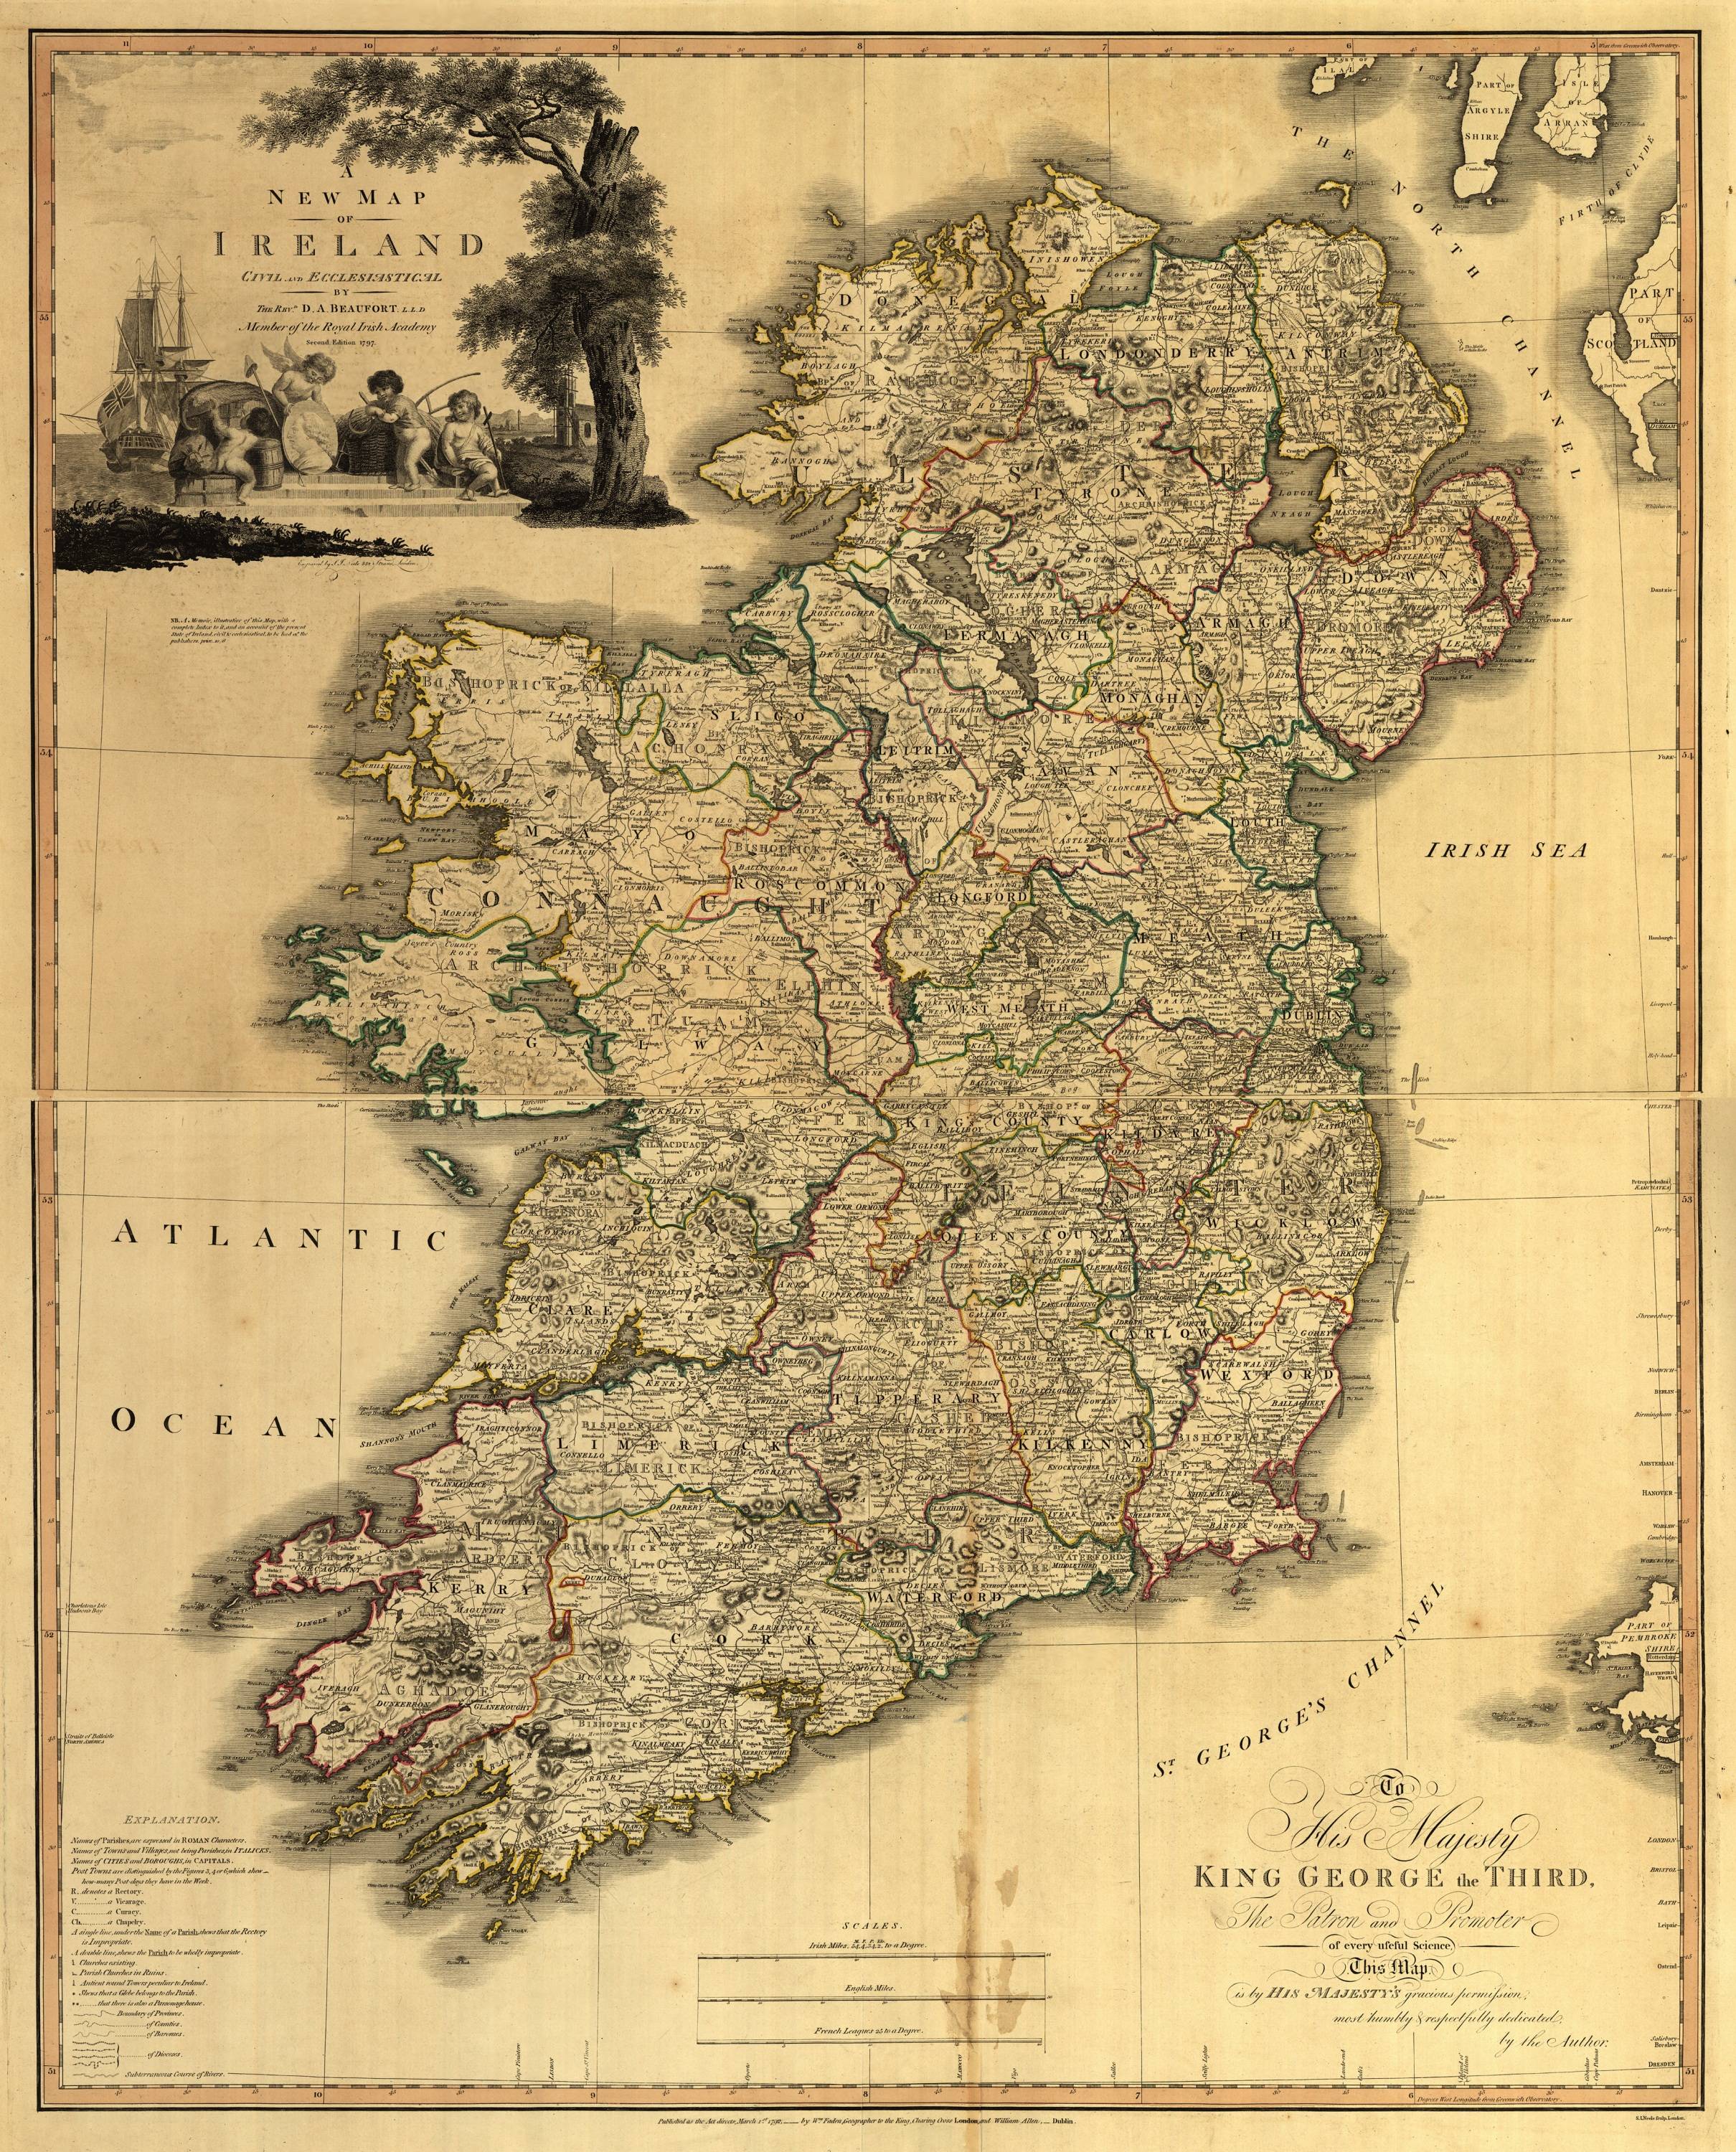 A New Map of Ireland (Civil and Ecclesiastical)